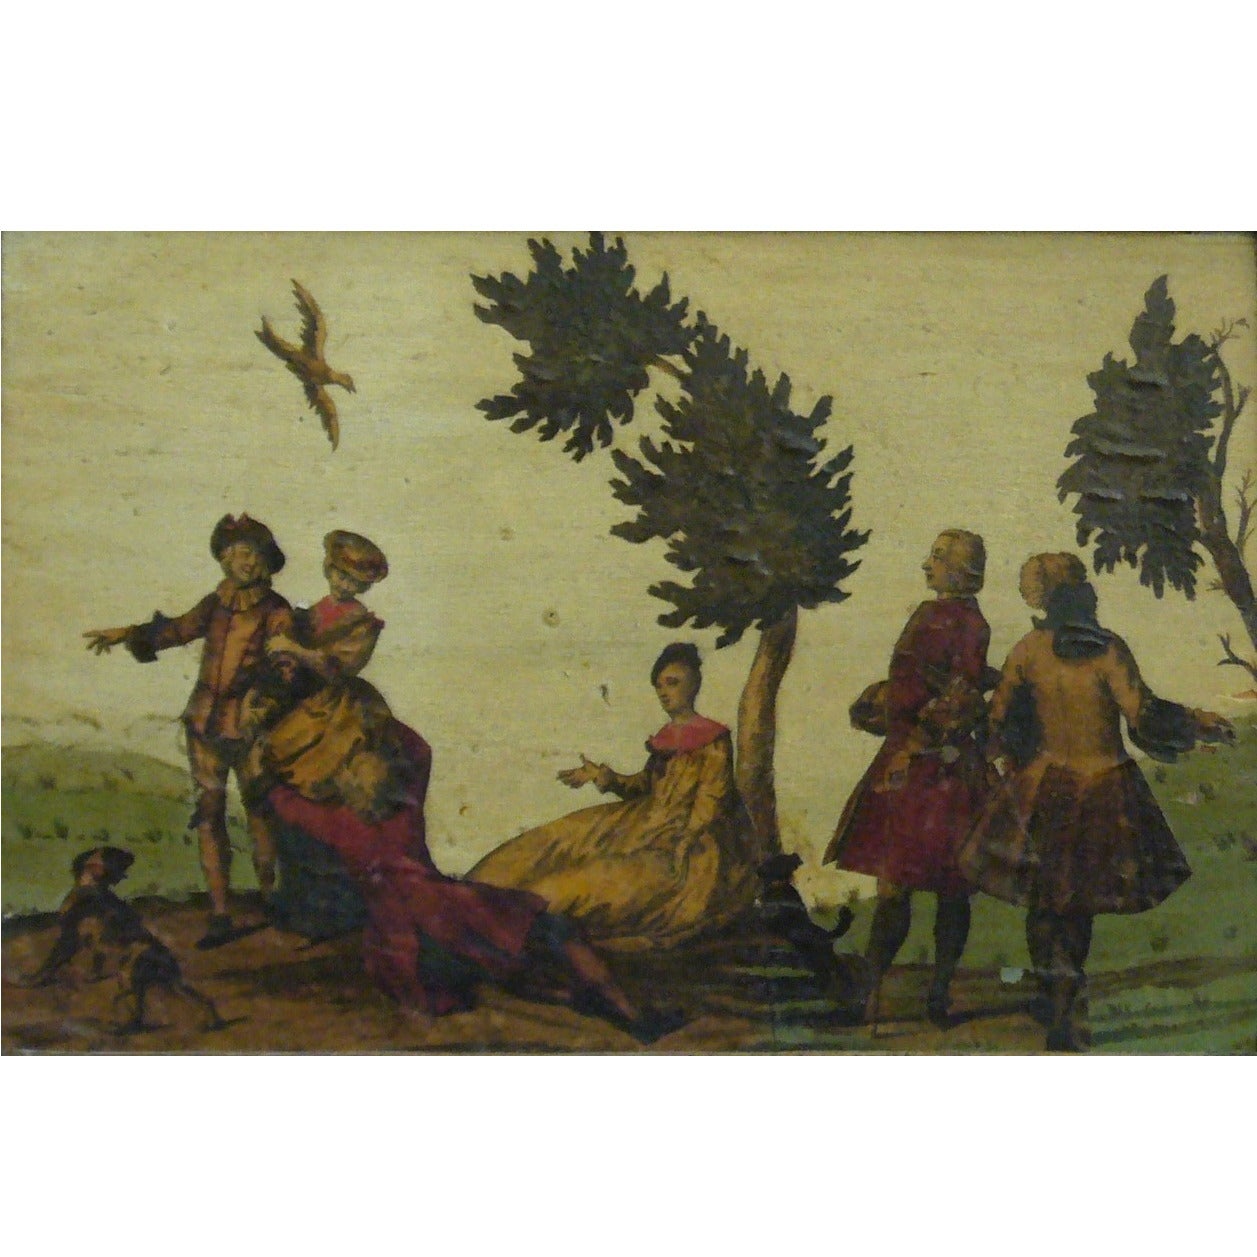 Decalcomania country scene lacquered on wood panel in gold painted frame.  Italy, 19th century. 
Dimension:14.5 